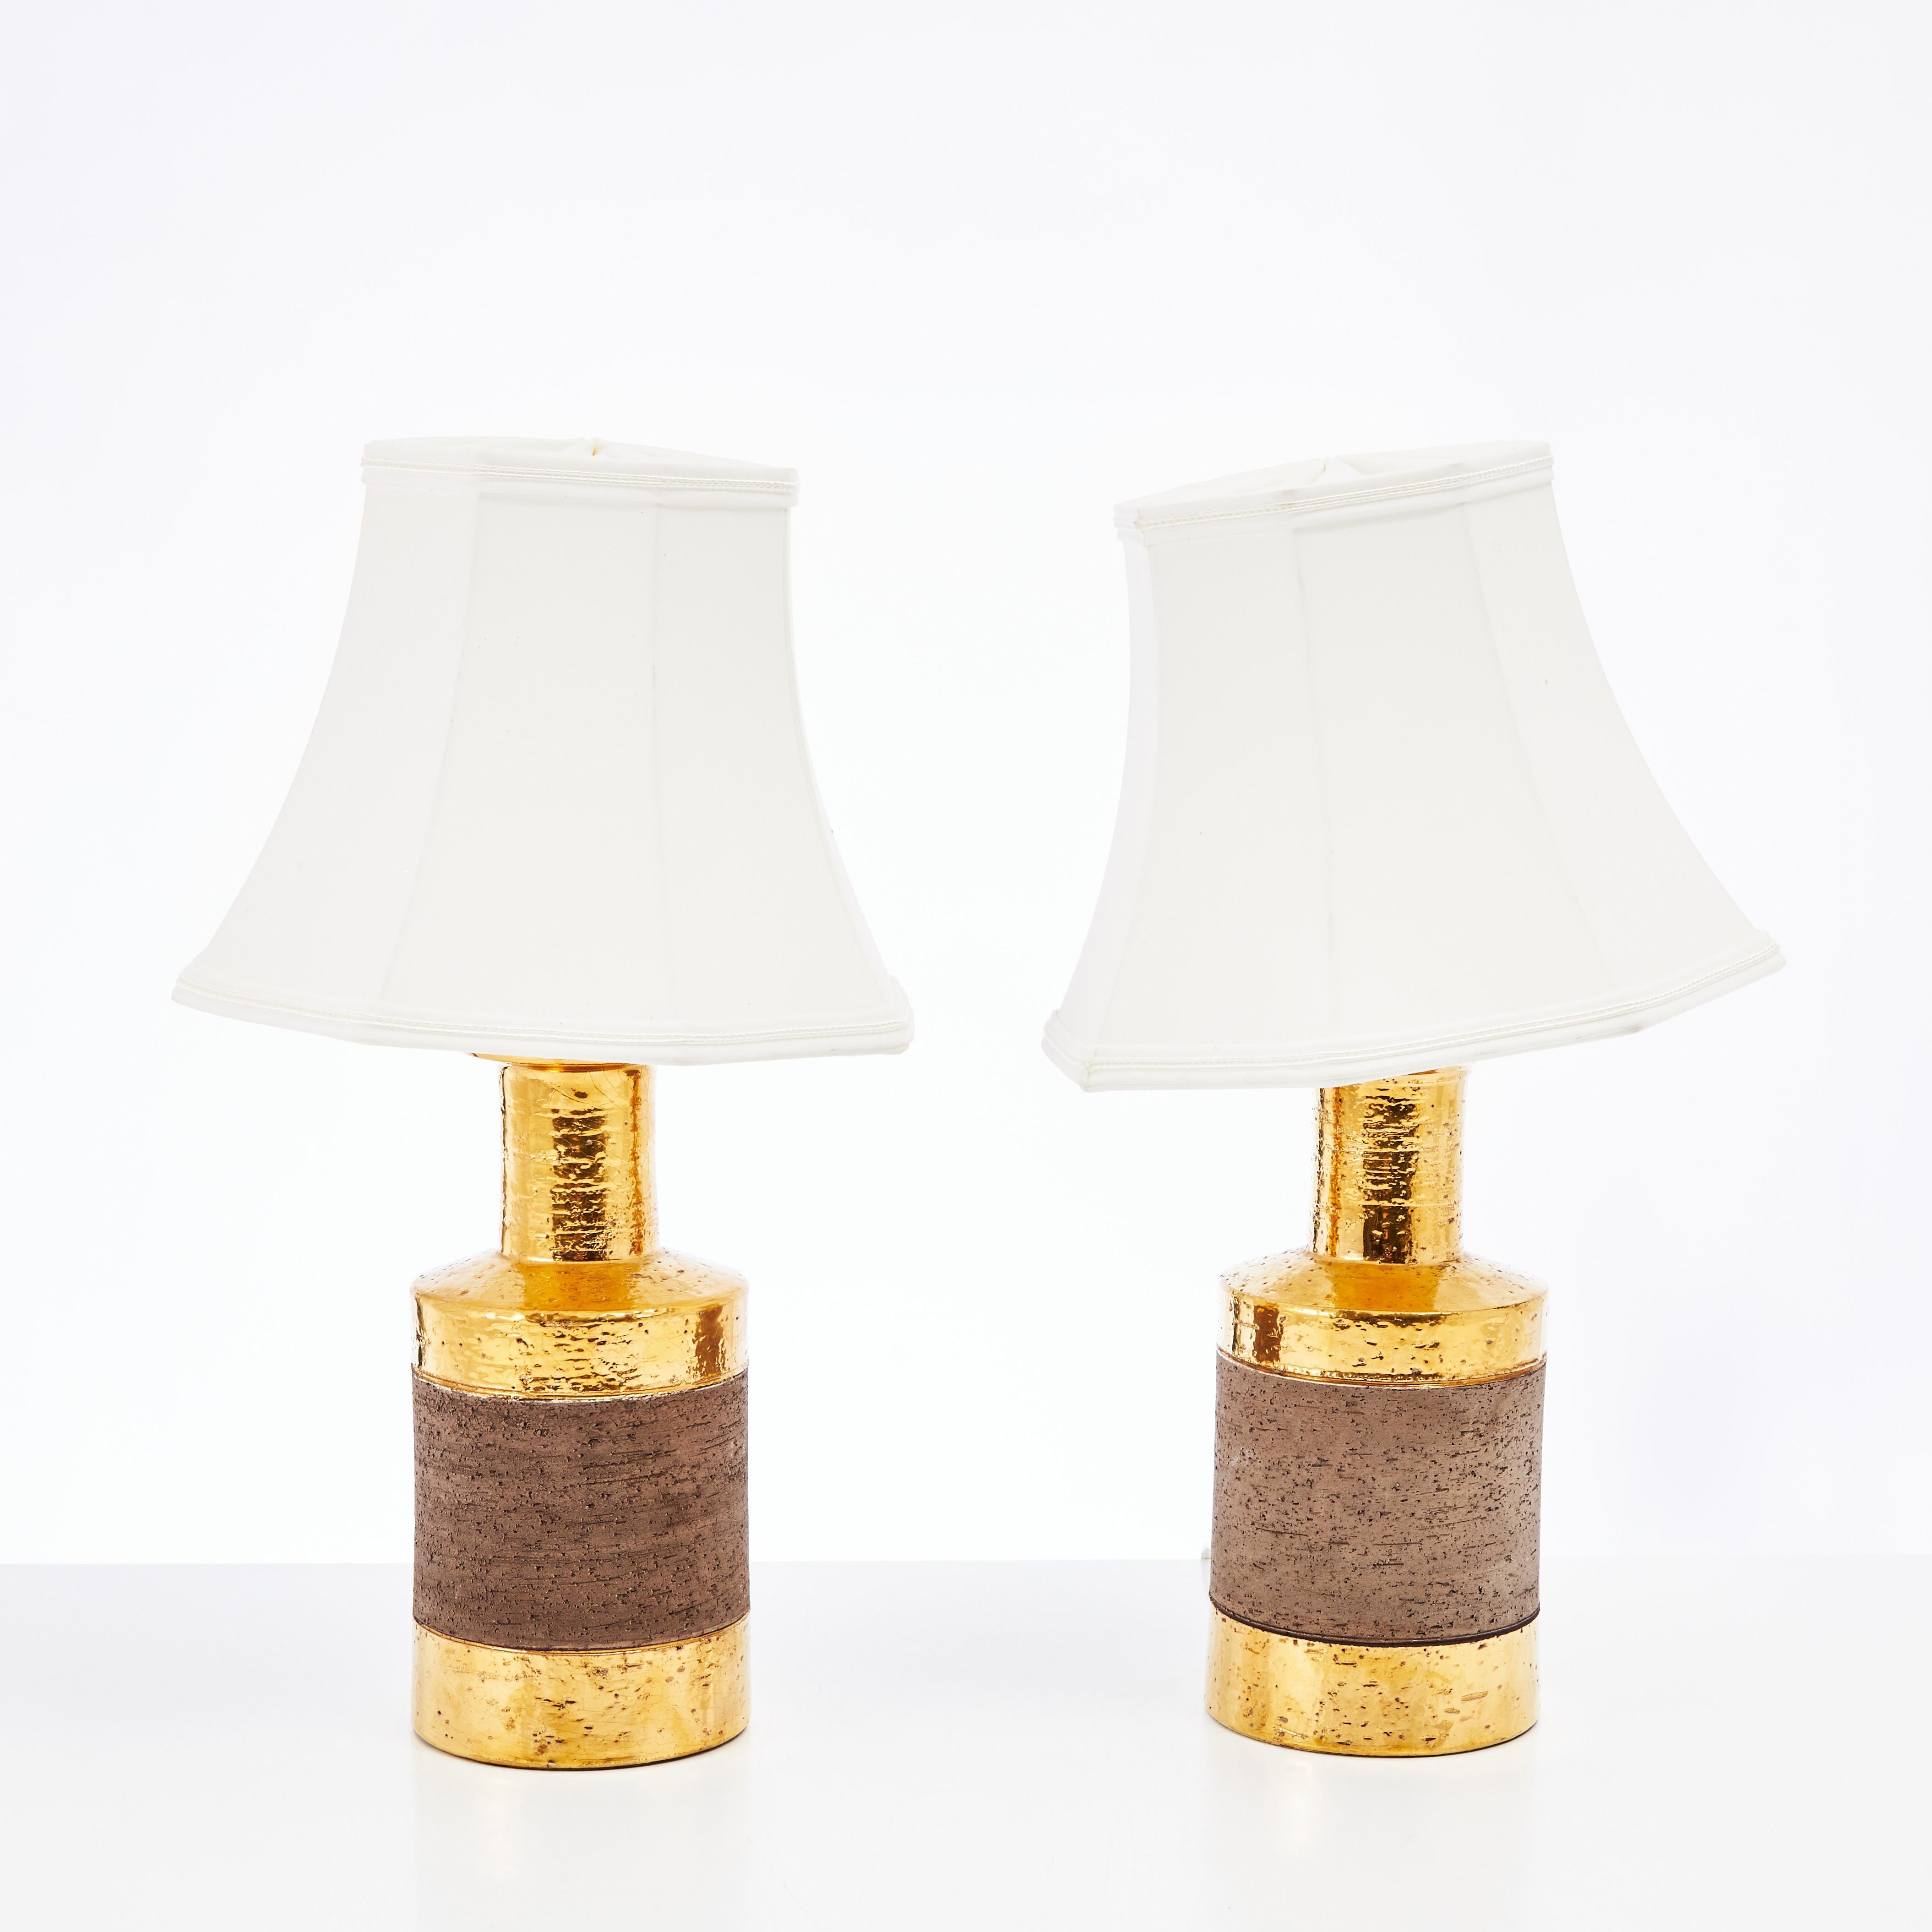 pair of table lamps in gold and natural ceramic earthward made by Bitossi Italy around 1970. Price for the pair
Good condition
Lamp base height 26 cm excluding lampshade
